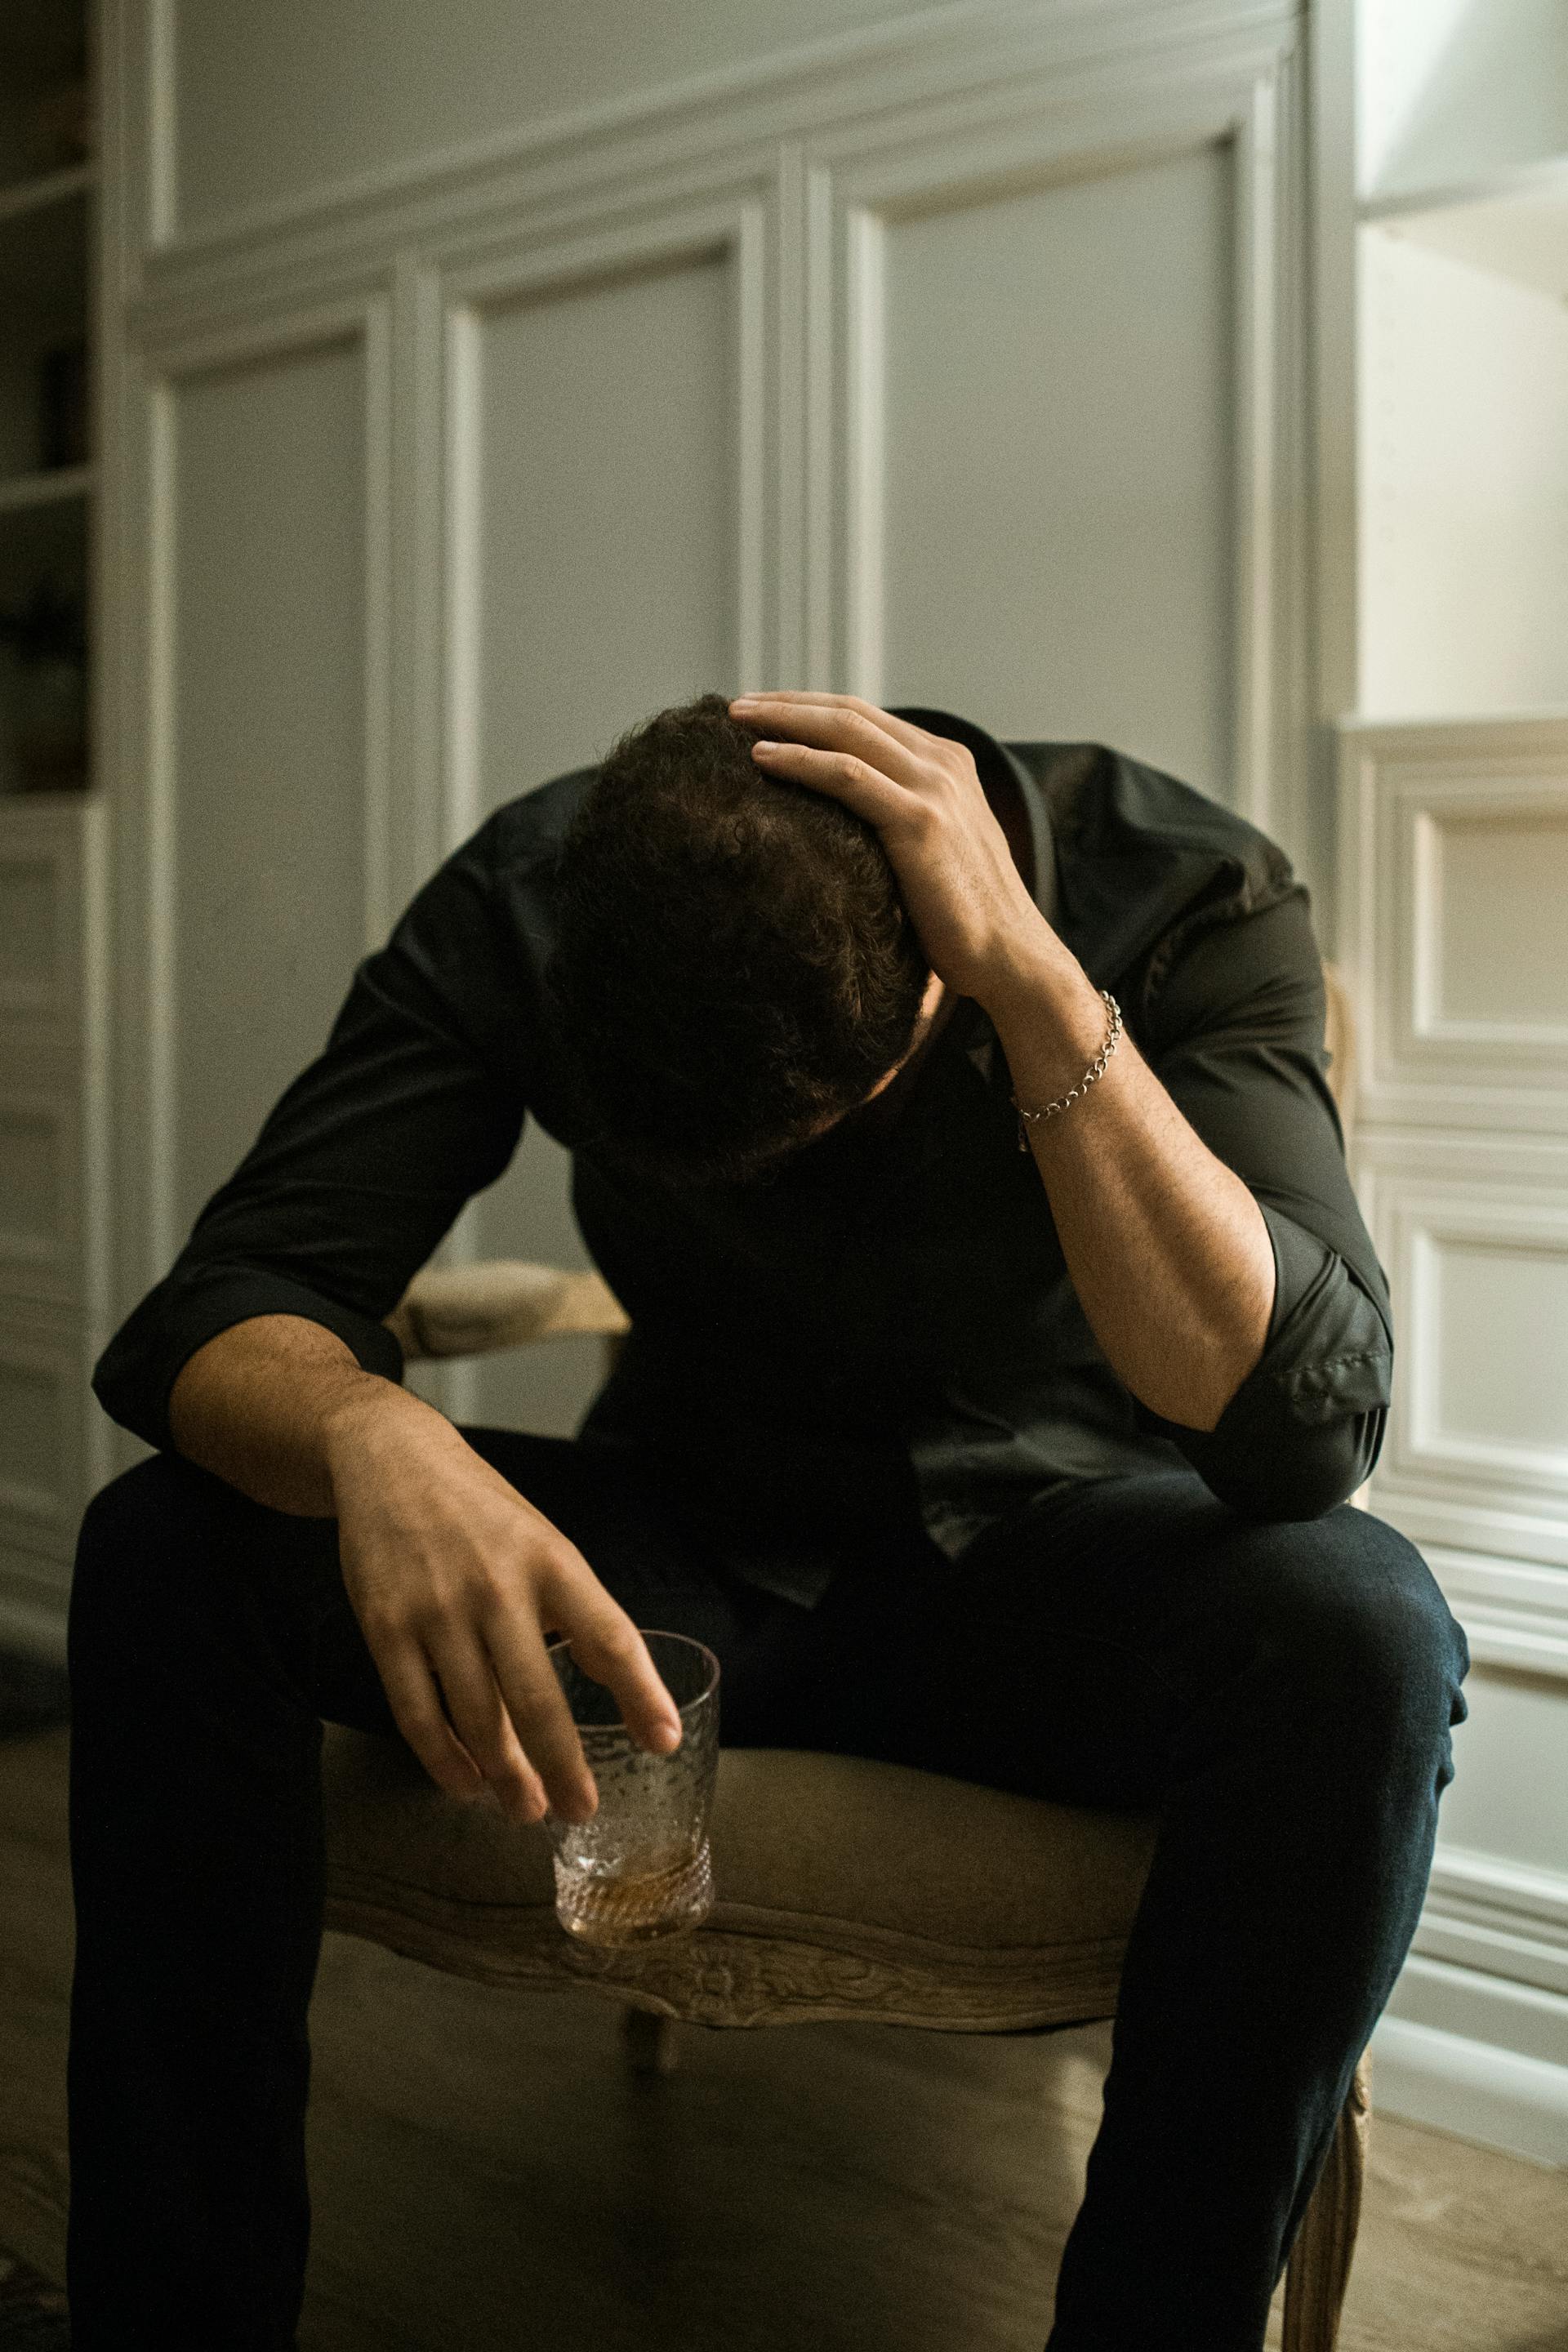 A depressed man sitting on a chair with his head bowed while holding a glass of drink | Source: Pexels